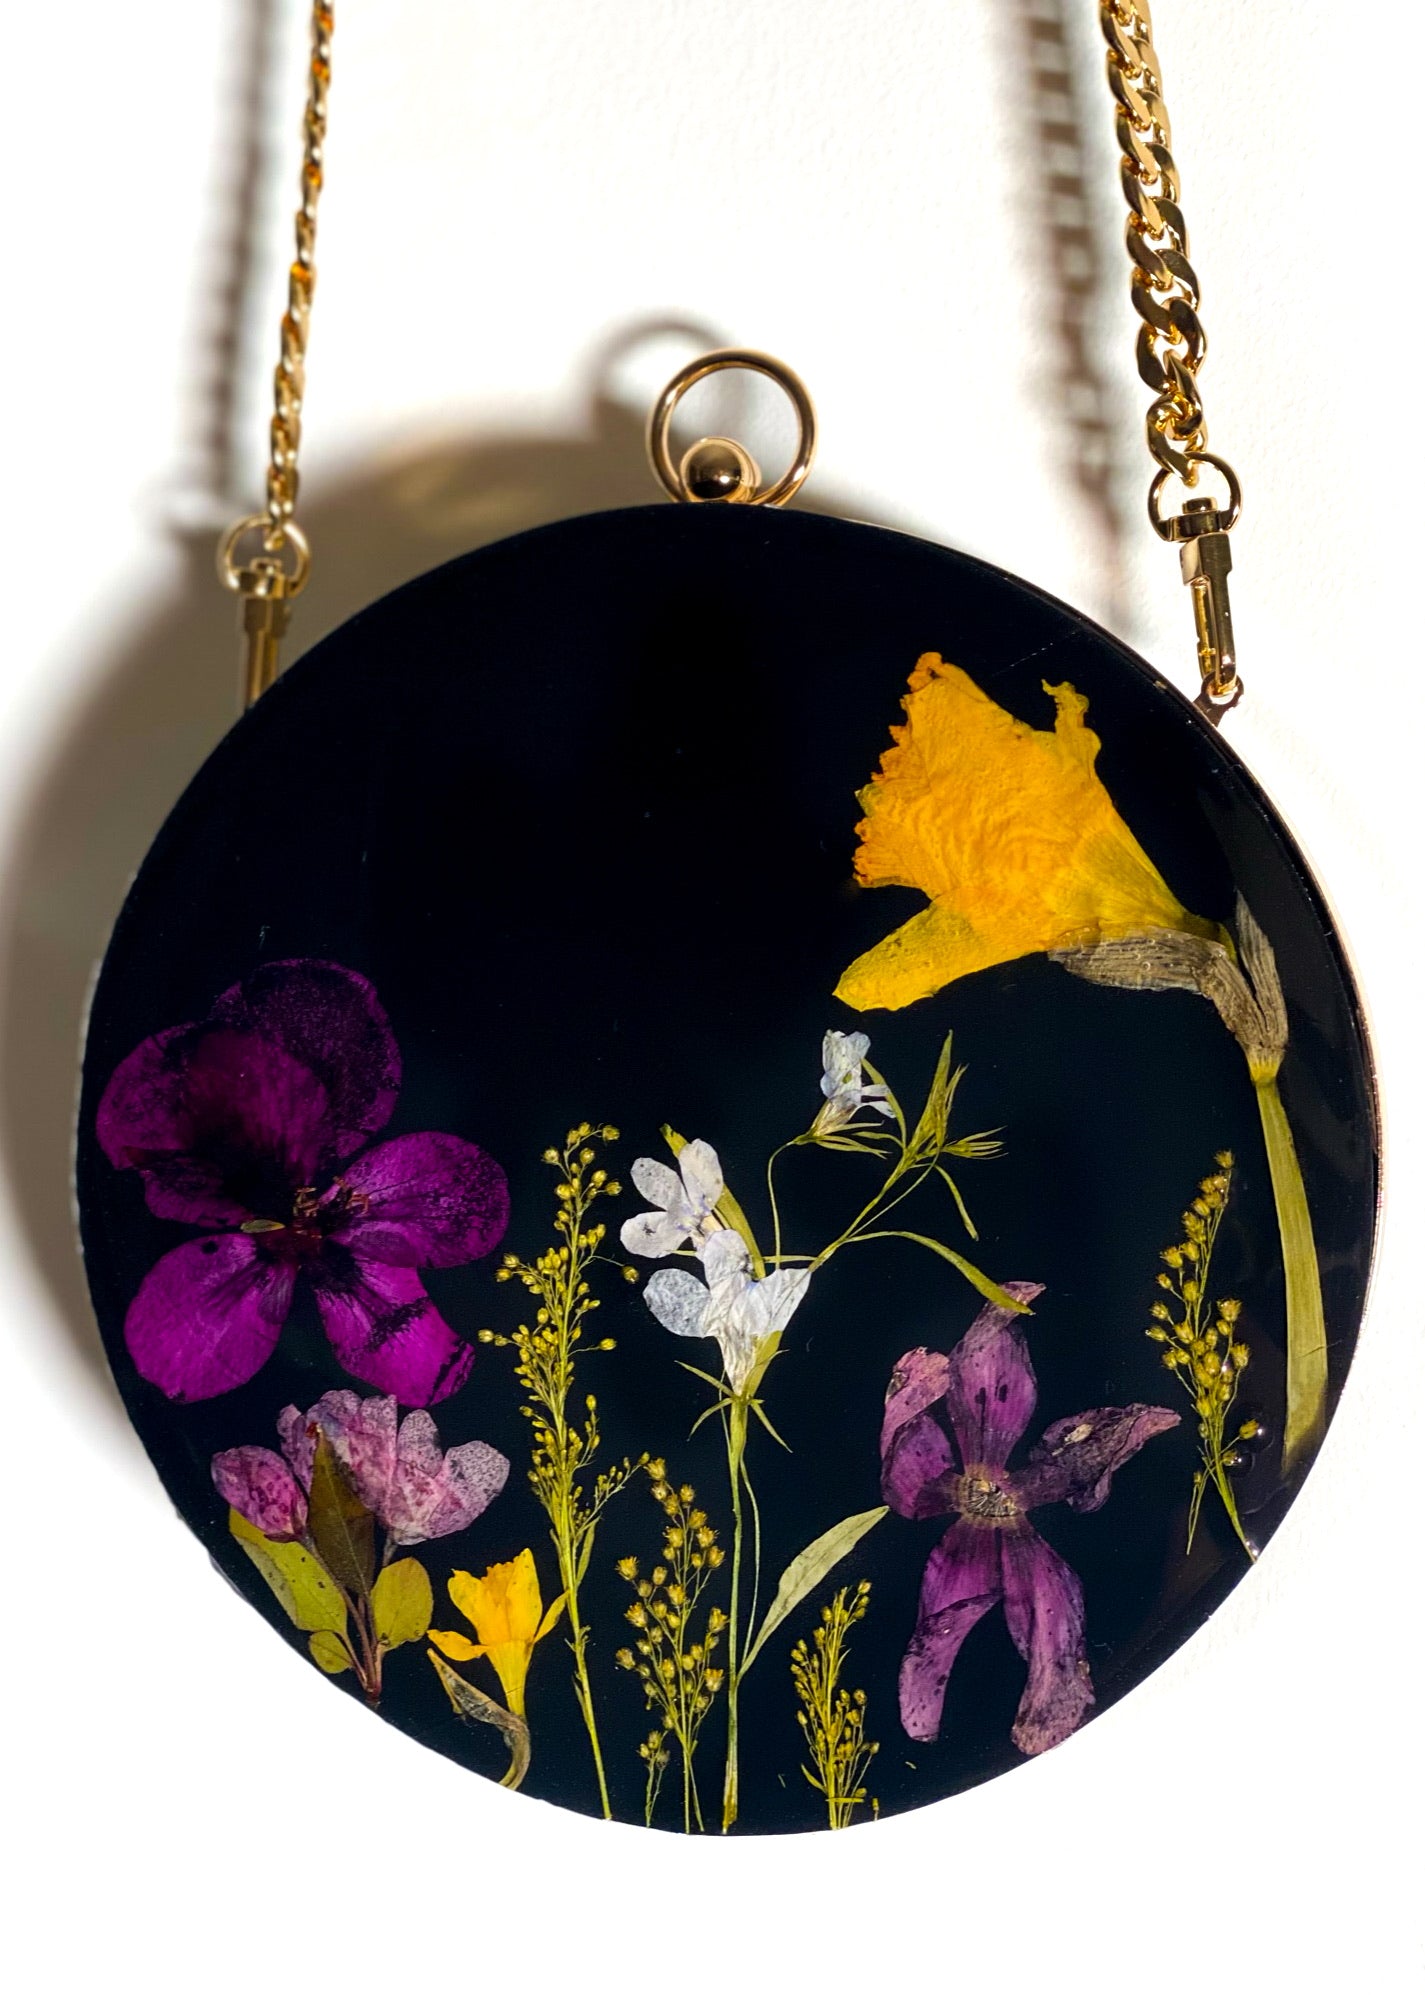 Enchanted Floral Clutch